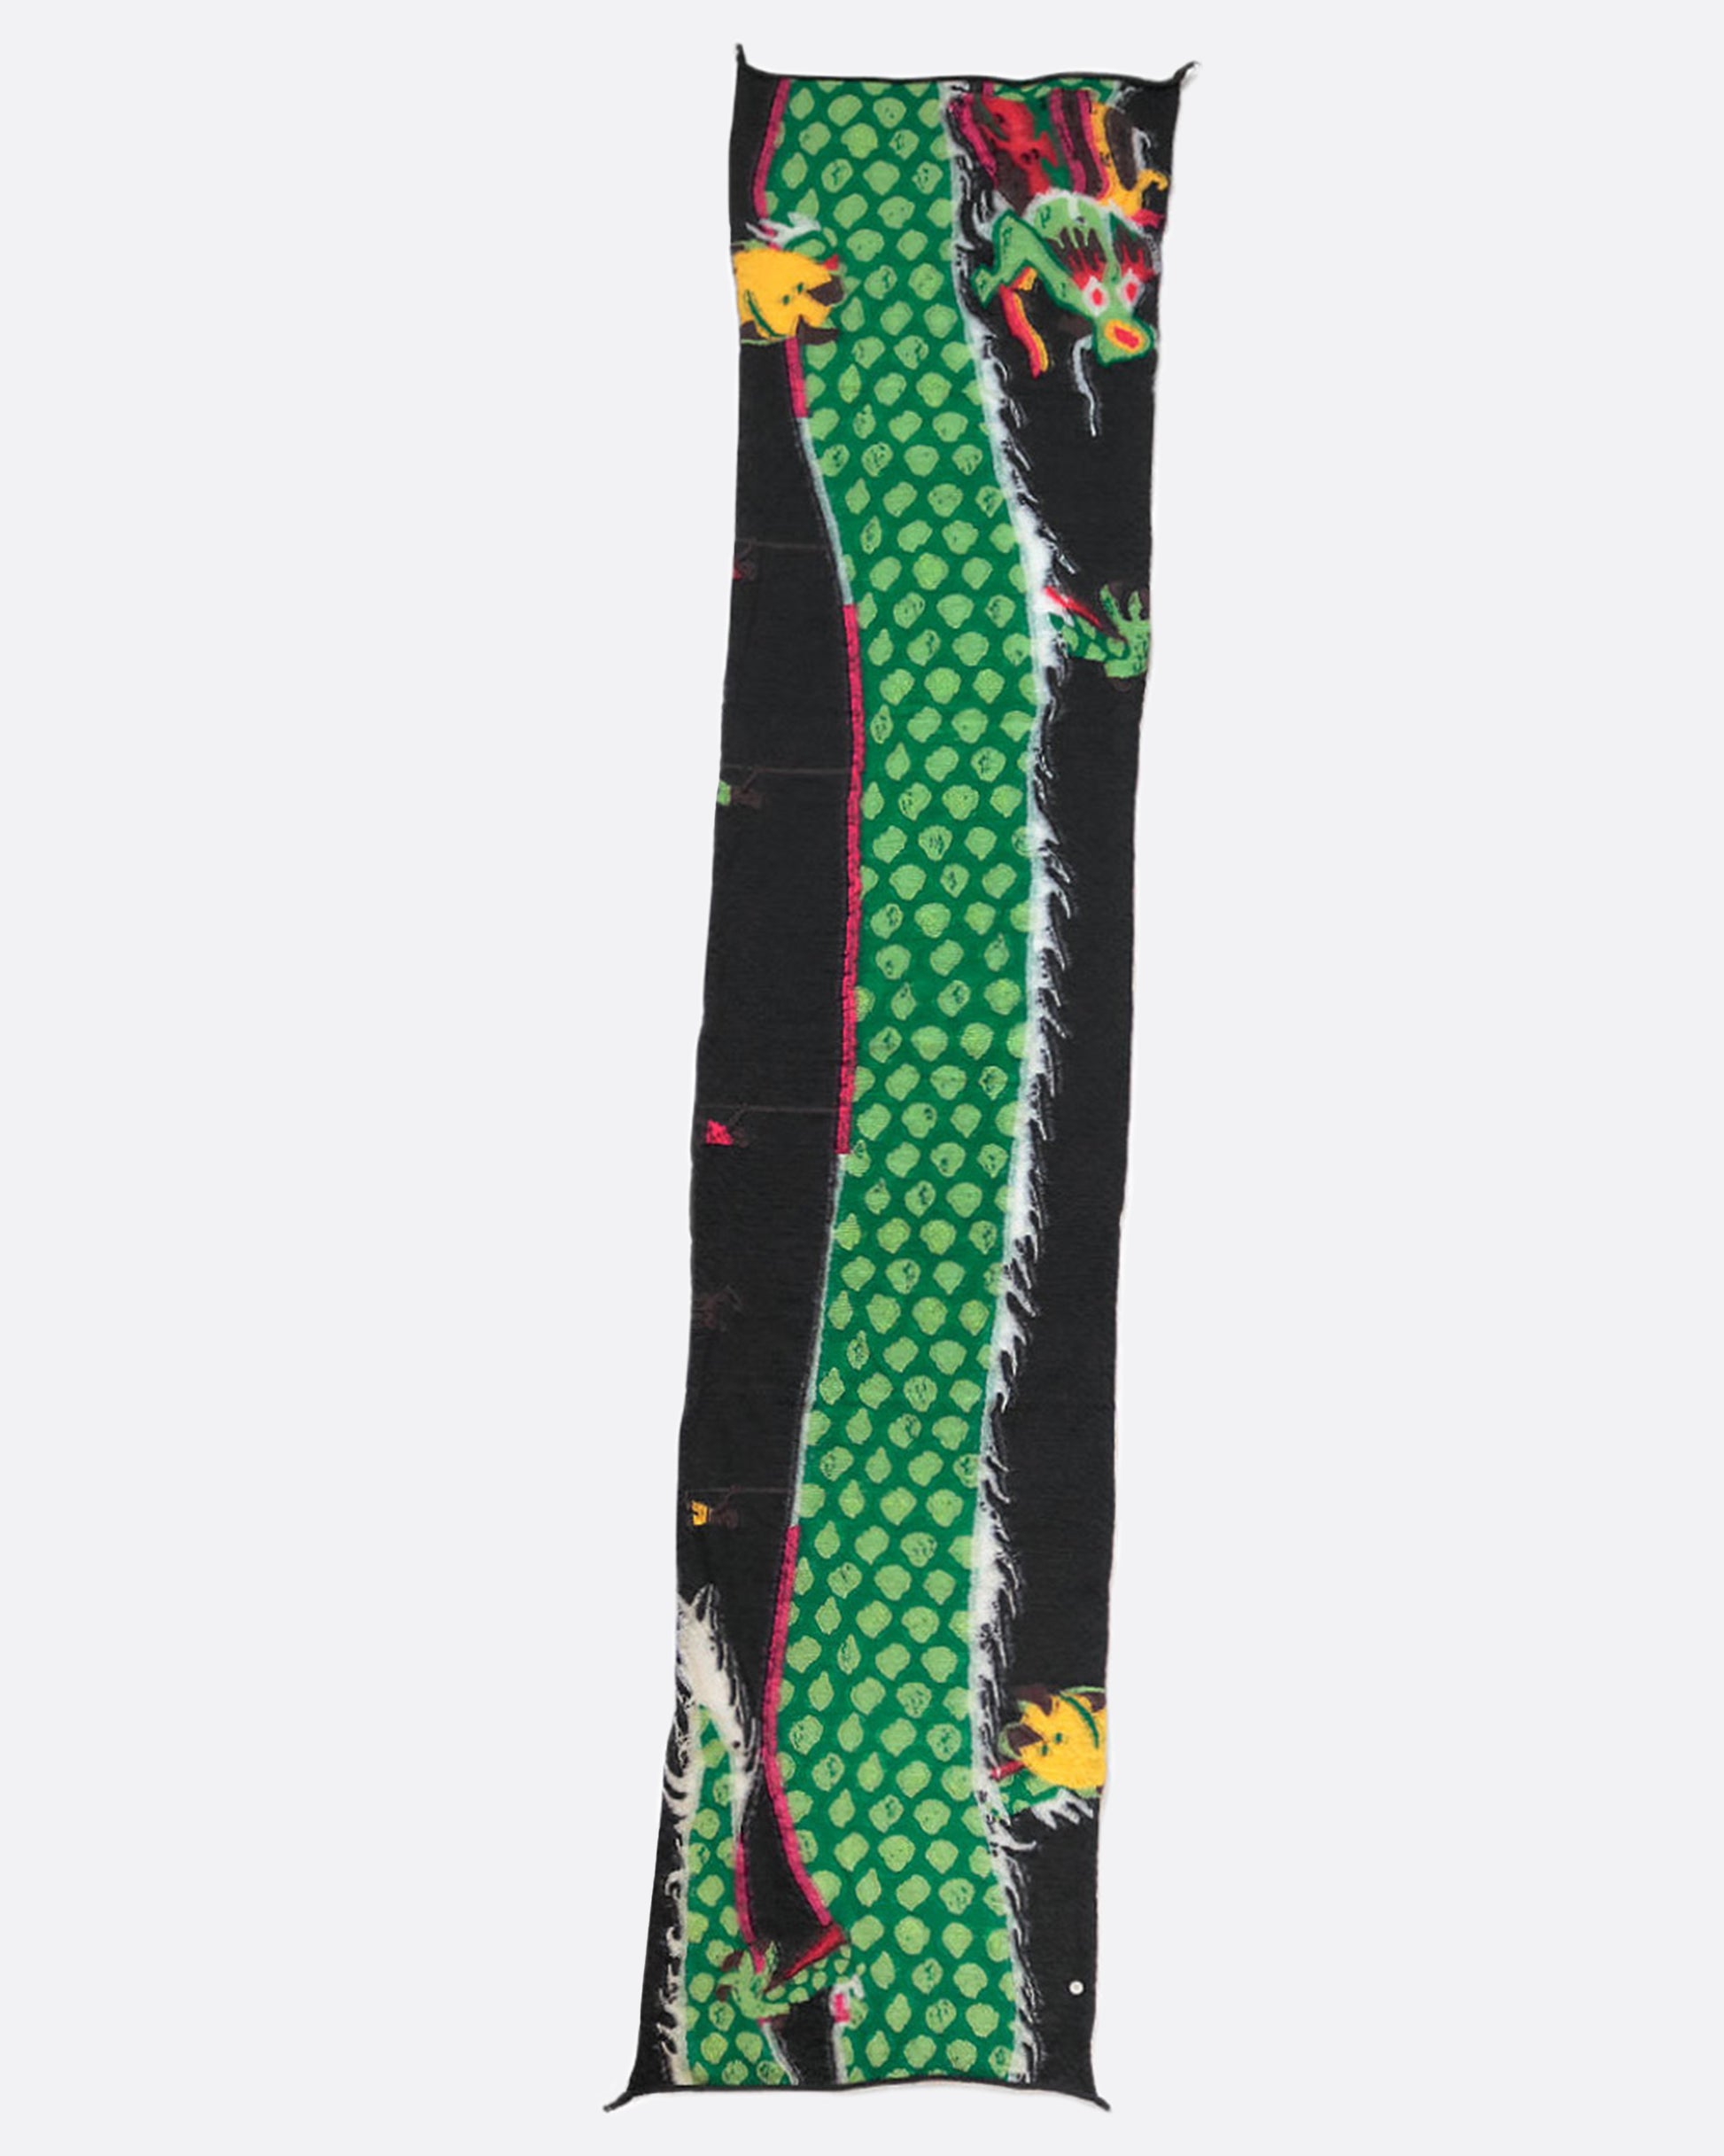 A wool scarf featuring a traditional Chinese dragon dance designed using shades of green and black.